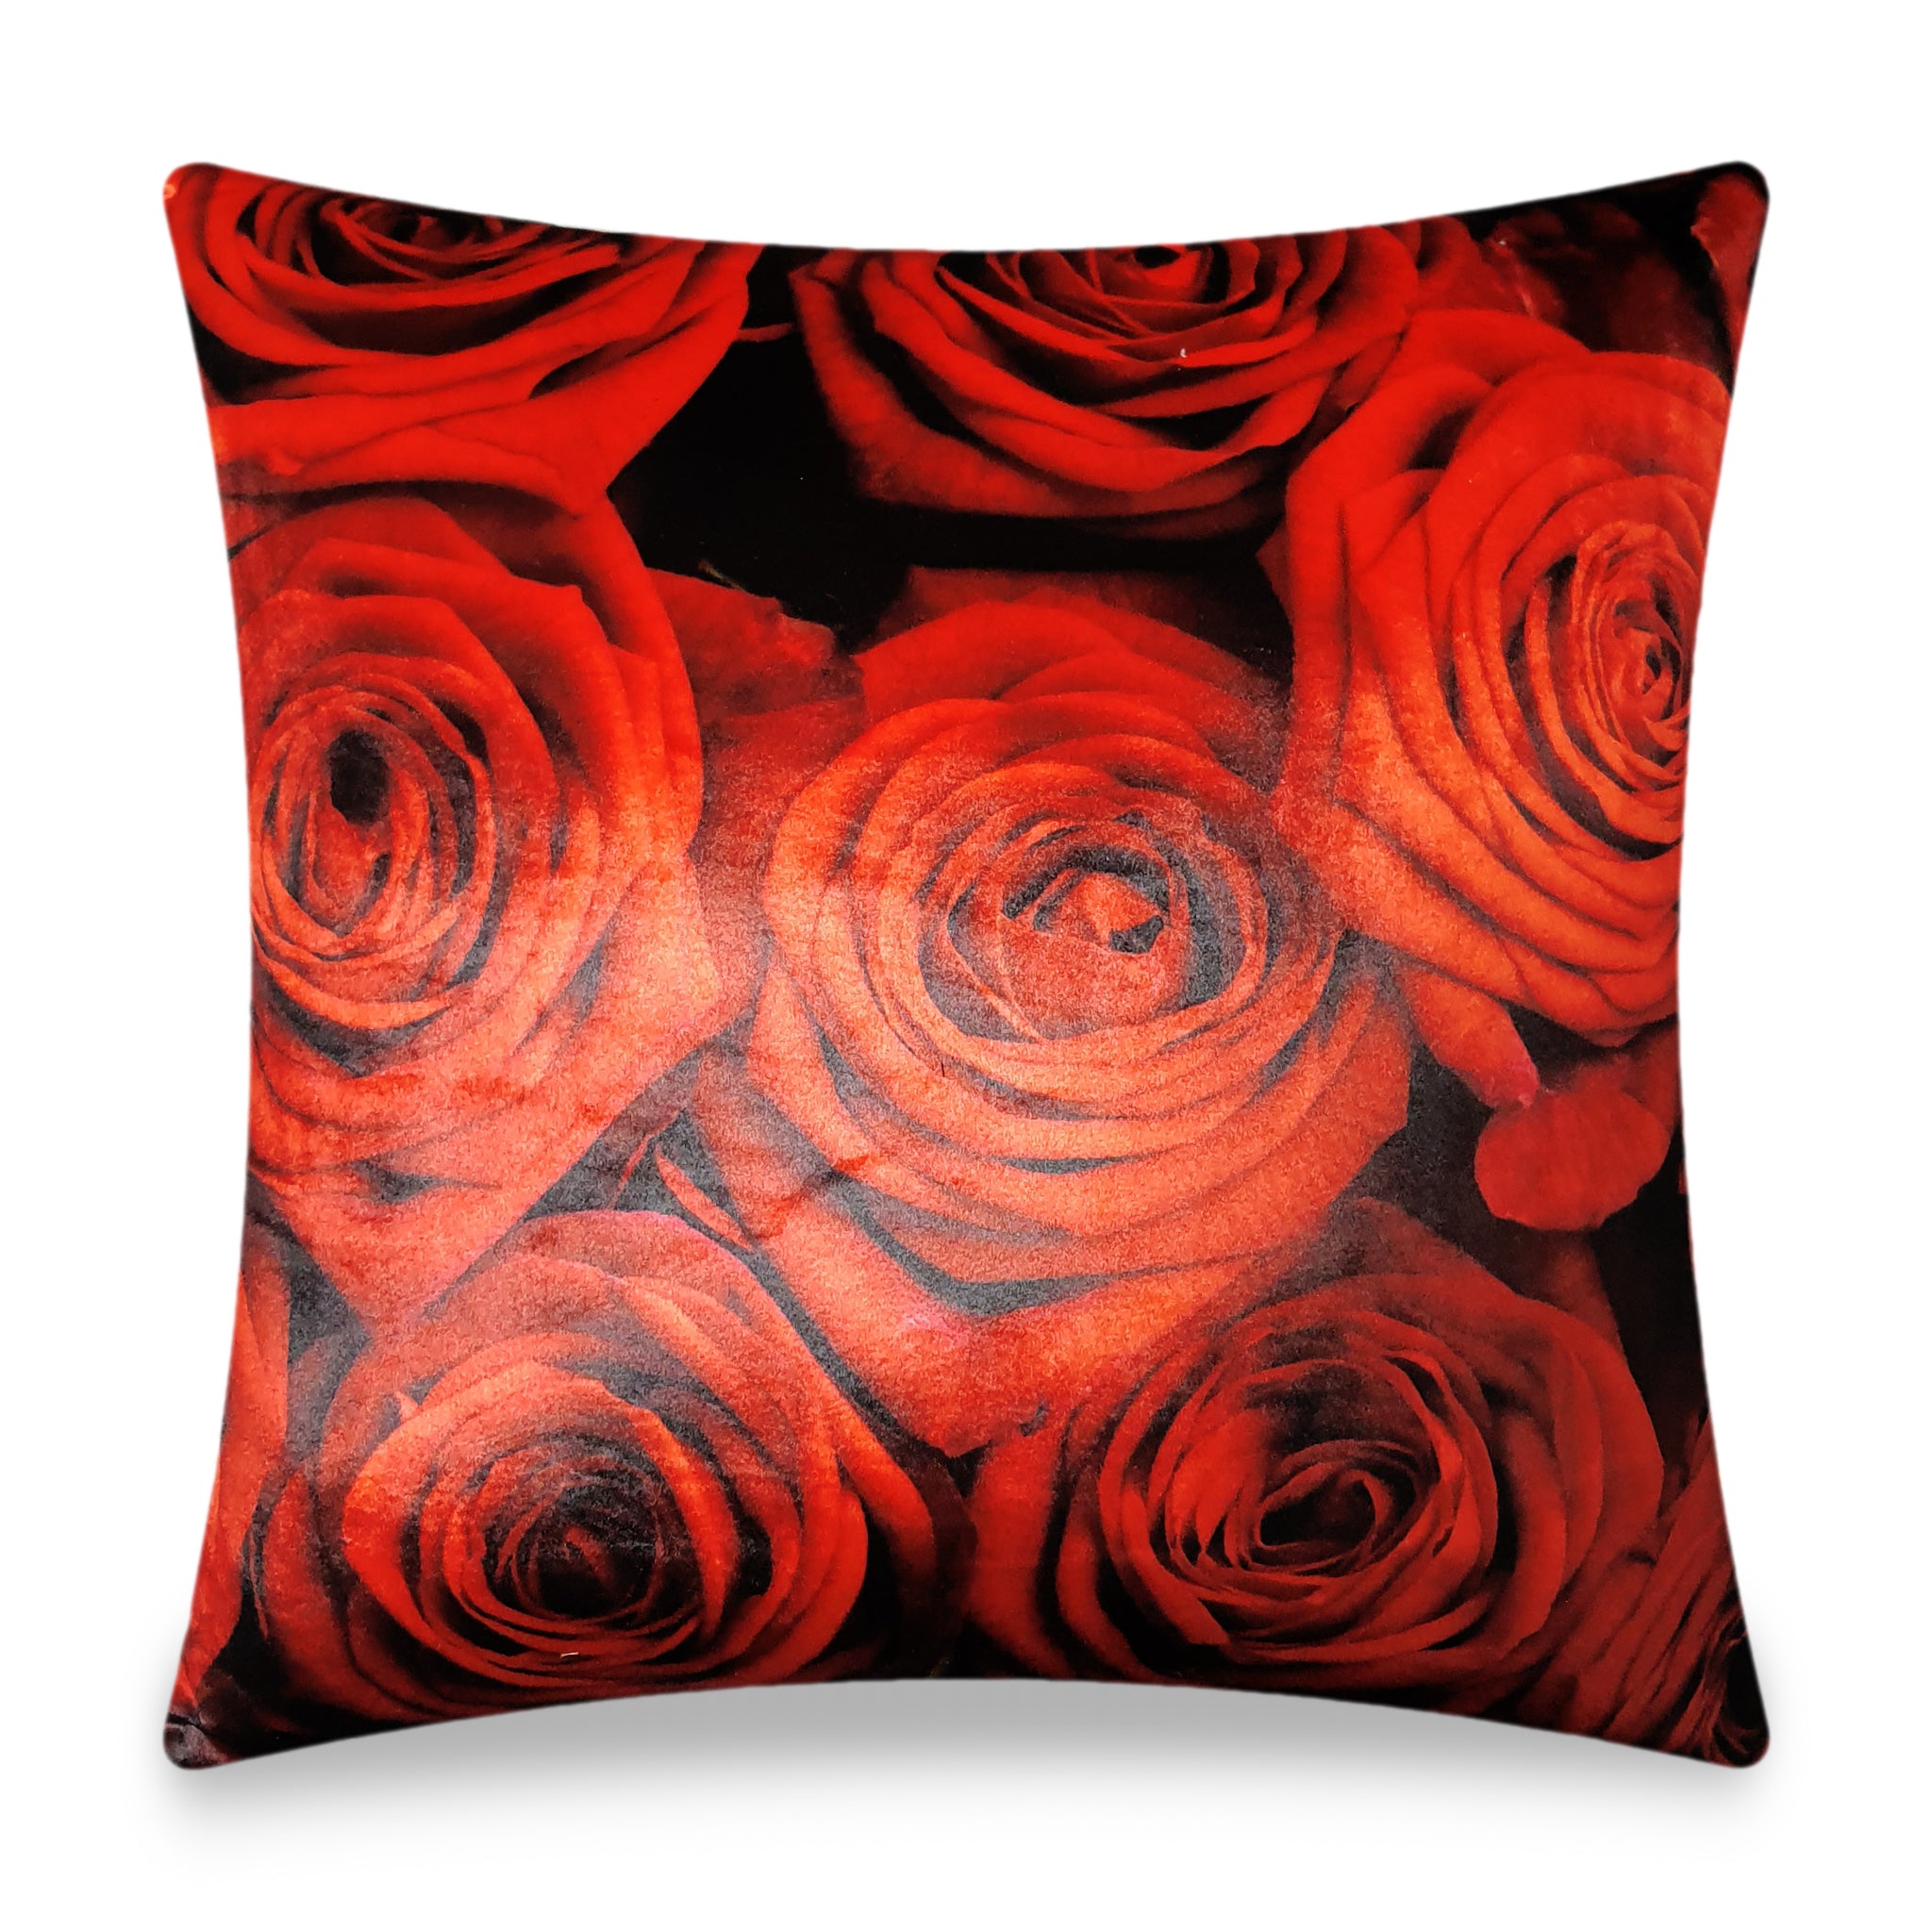 Red Velvet Cushion Cover Pure Red Rose Close-up Photo Decorative Pillowcase Modern Home Decor Throw Pillow for Sofa Chair 45x45 cm 